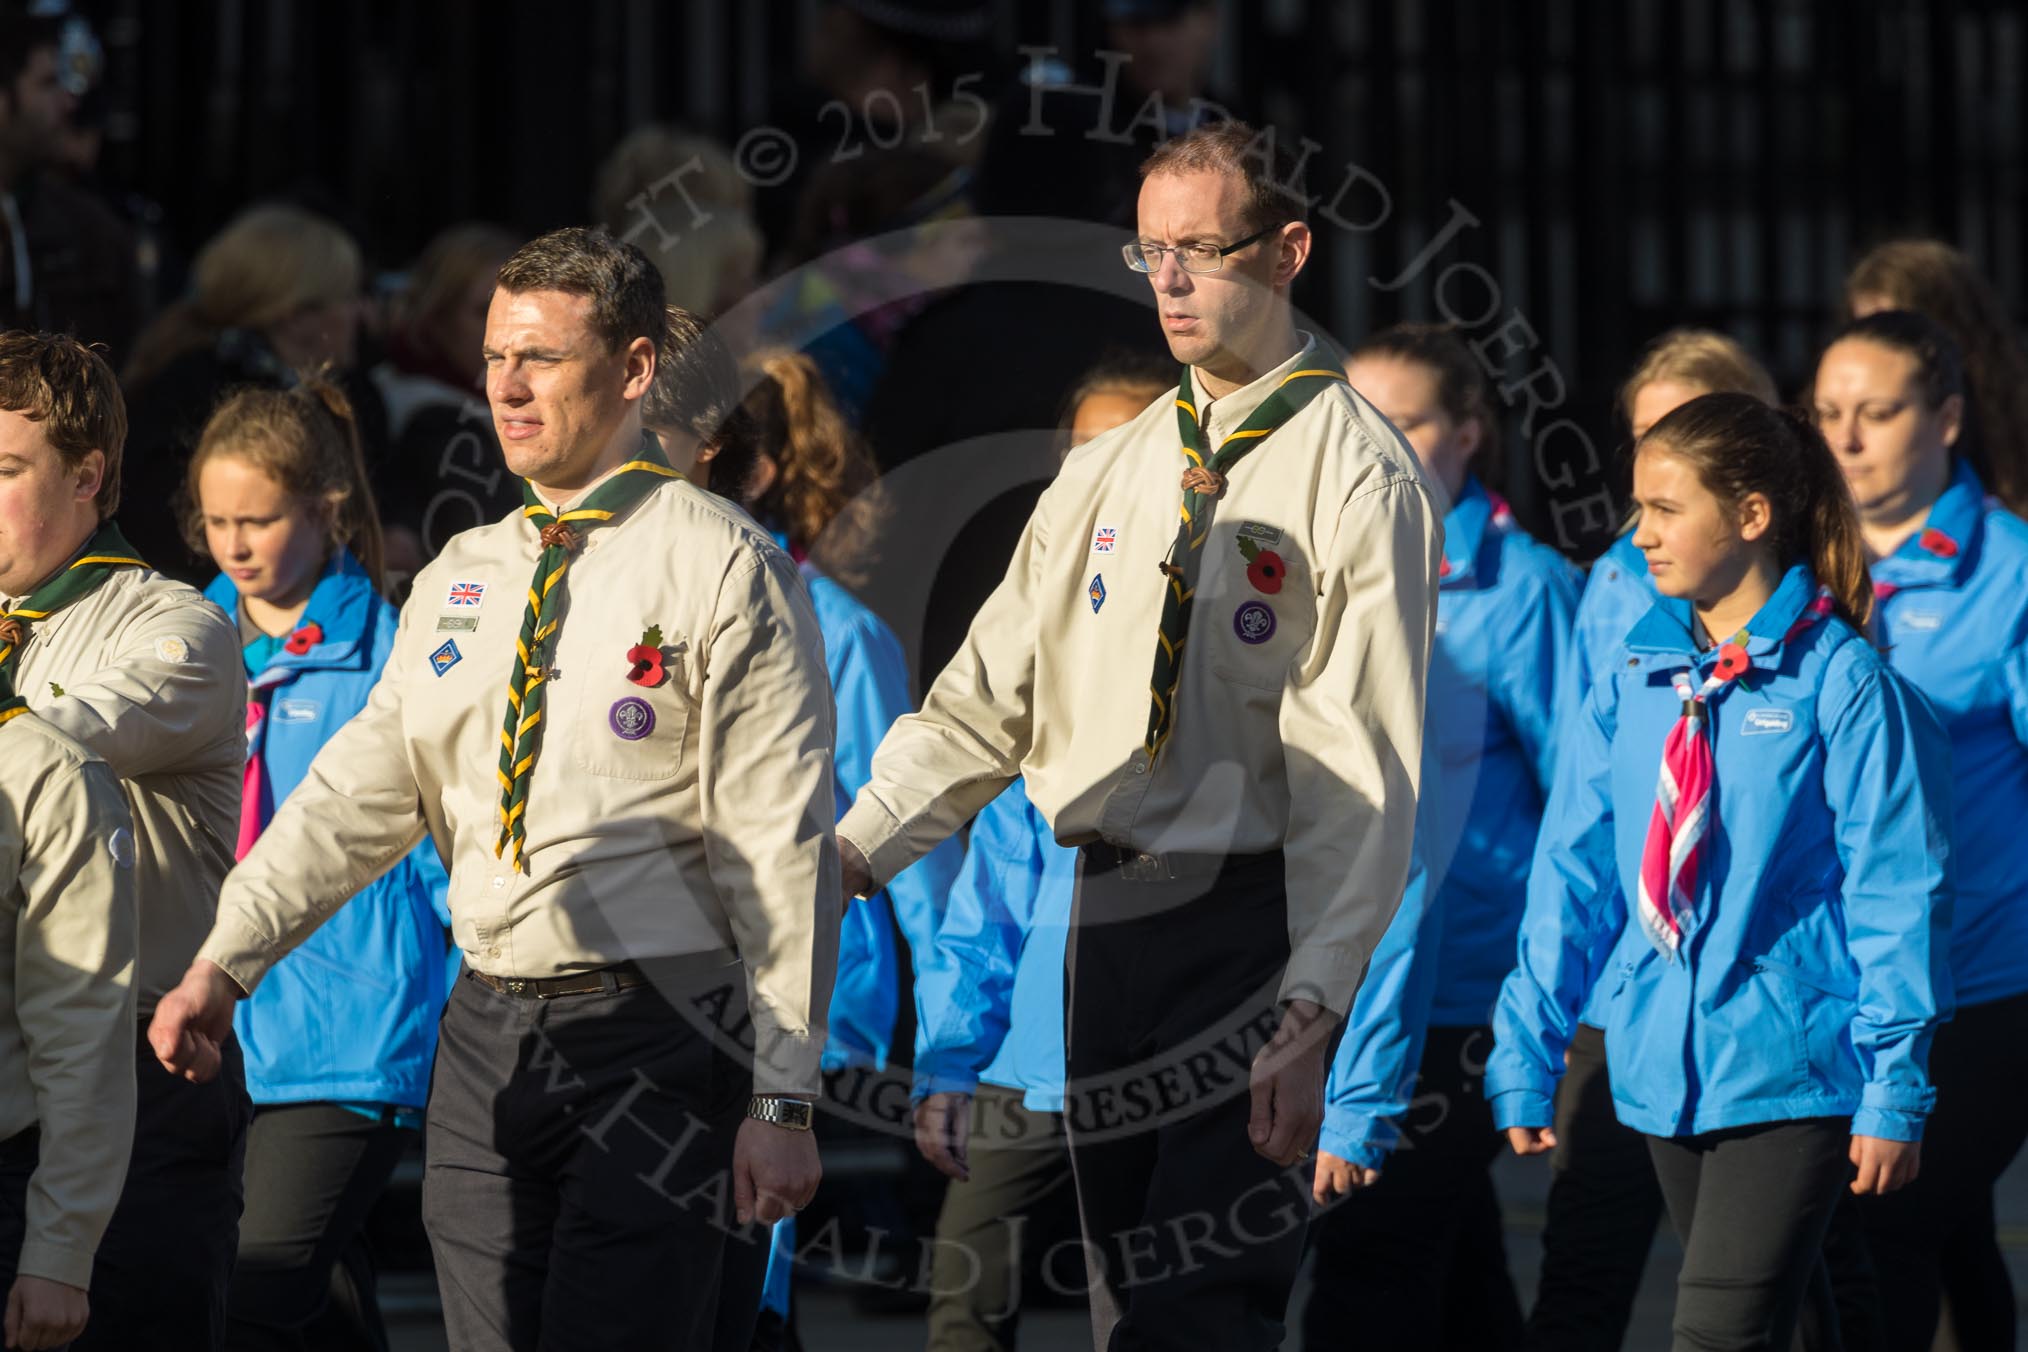 March Past, Remembrance Sunday at the Cenotaph 2016: M33 Scout Association.
Cenotaph, Whitehall, London SW1,
London,
Greater London,
United Kingdom,
on 13 November 2016 at 13:18, image #2852